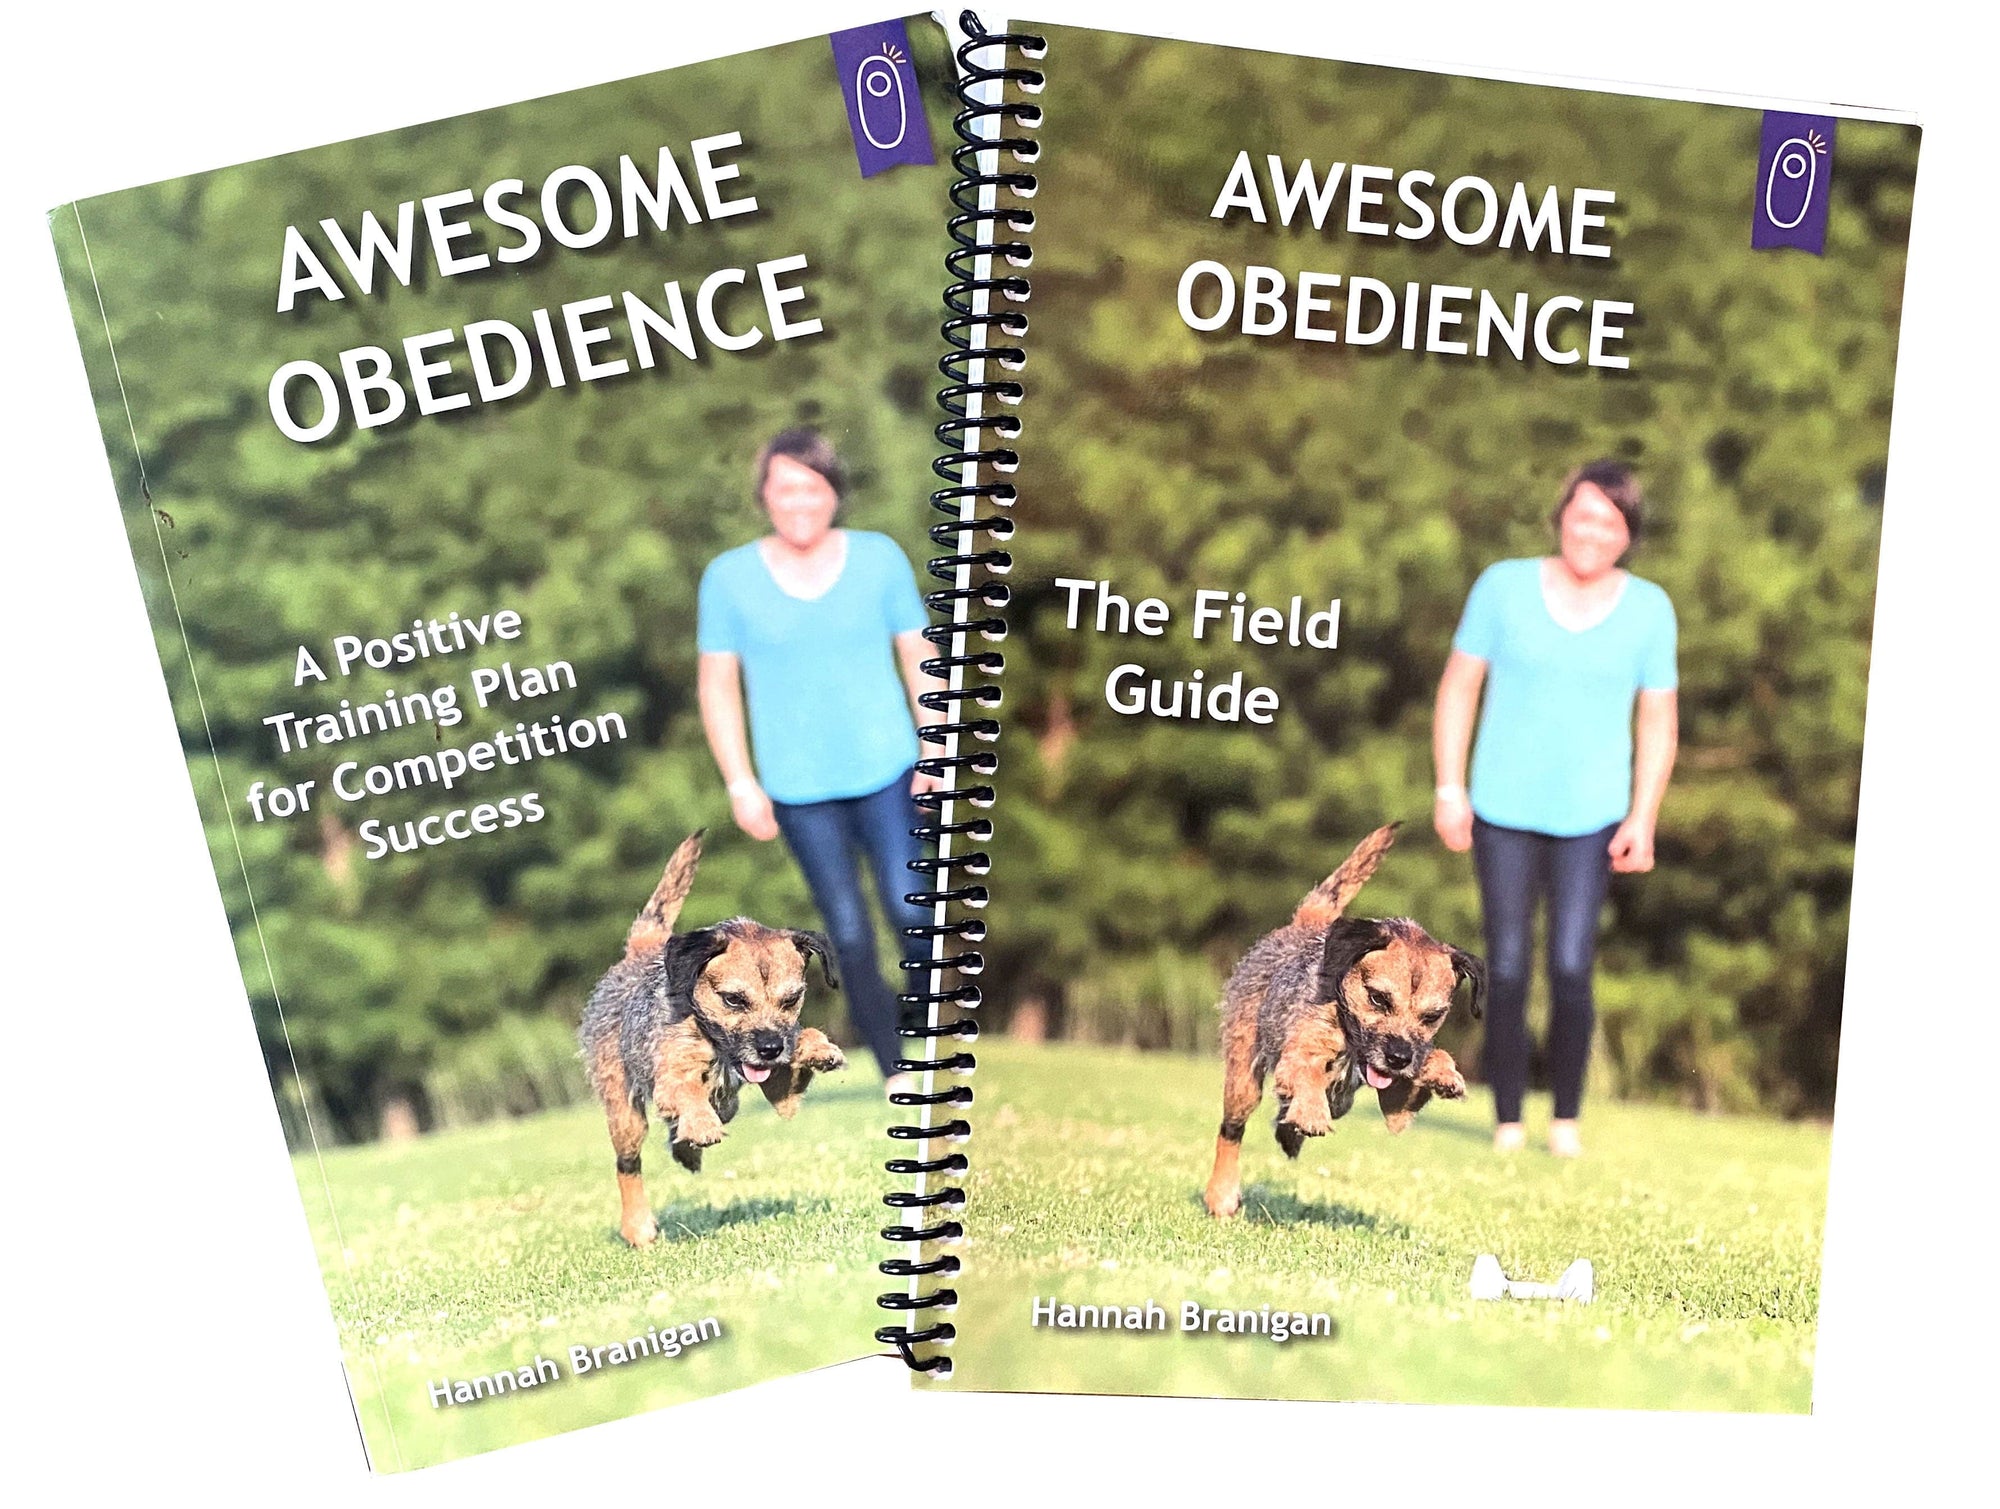 Awesome Obedience: The Field Guide by Hannah Branigan